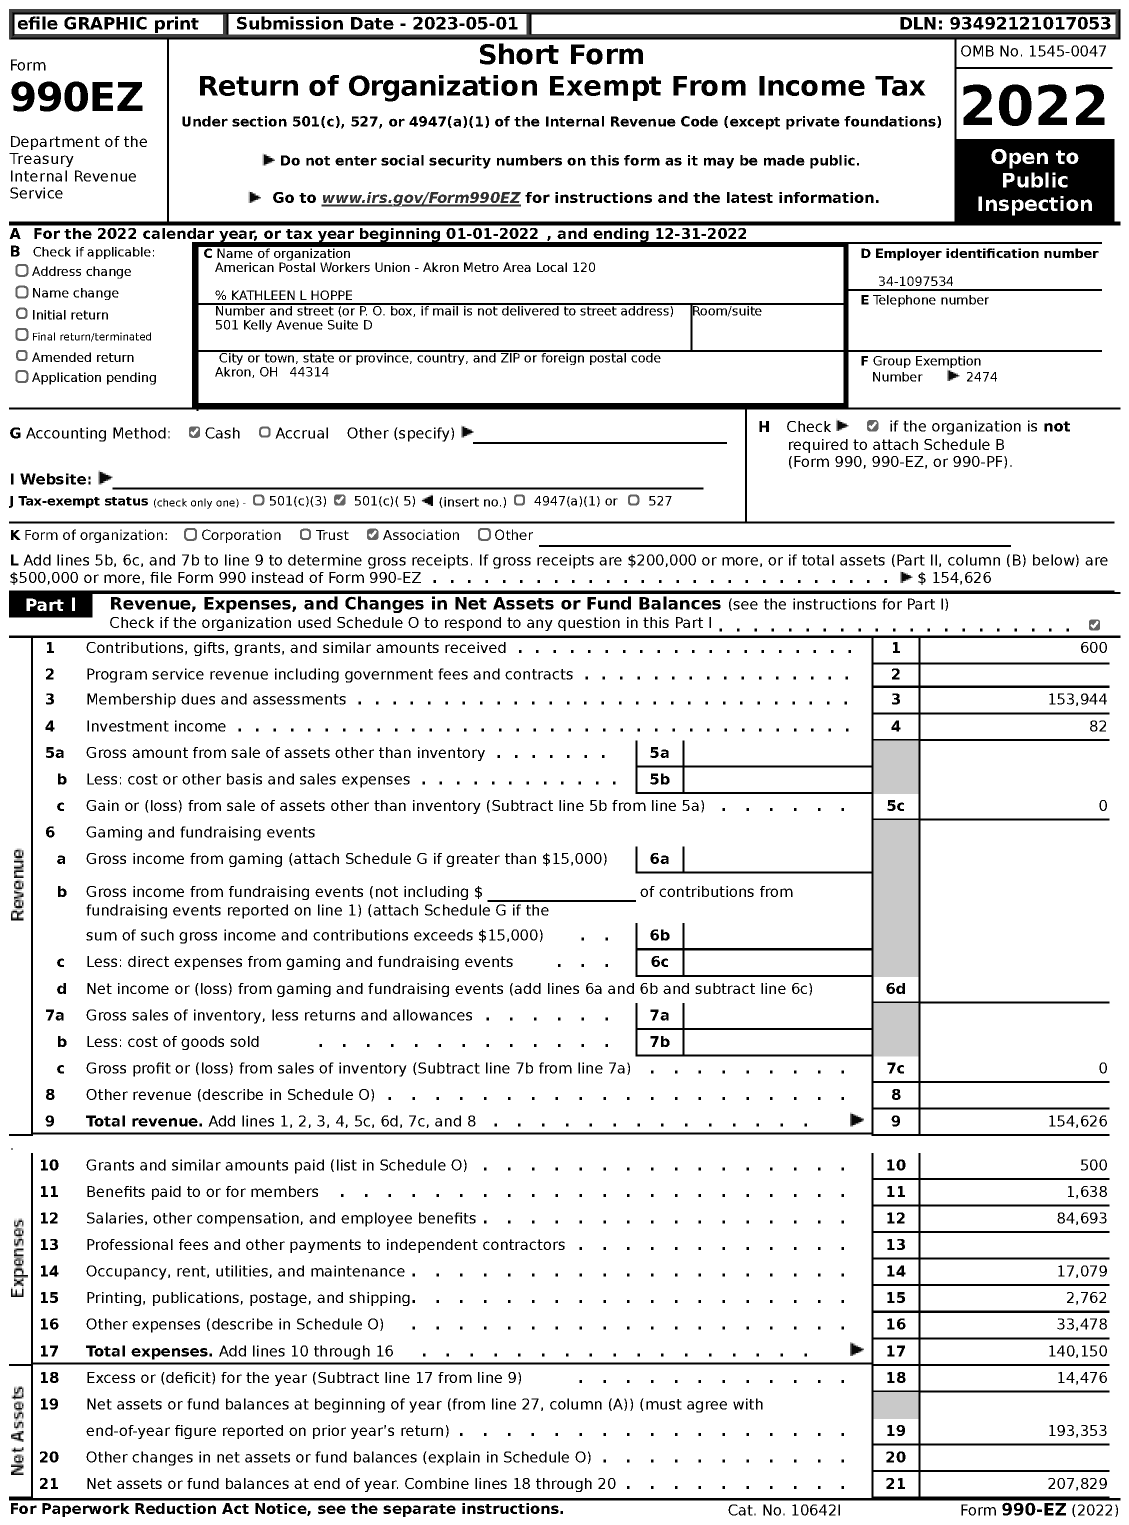 Image of first page of 2022 Form 990EZ for American Postal Workers Union - 120 Akron Metro Area Local